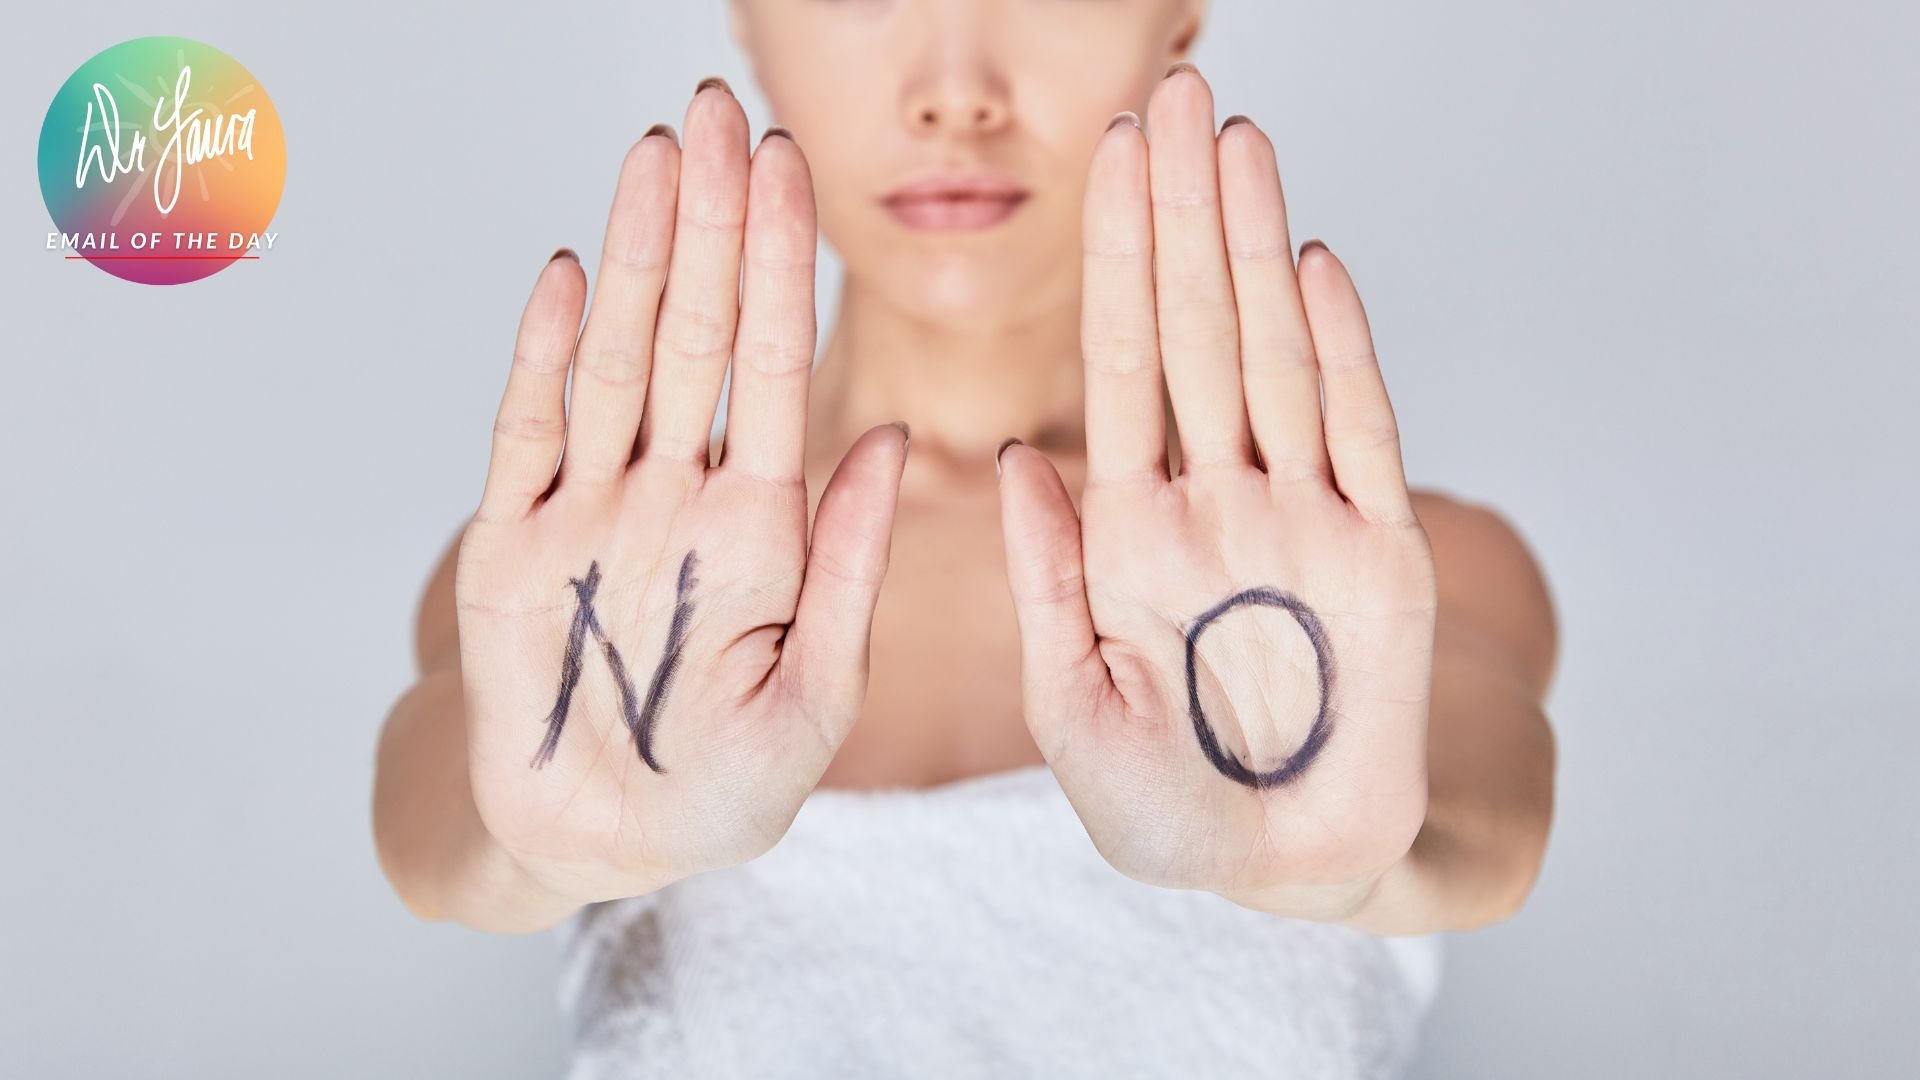 Woman holds up the palms of her hands that have the letters "N" and "O"